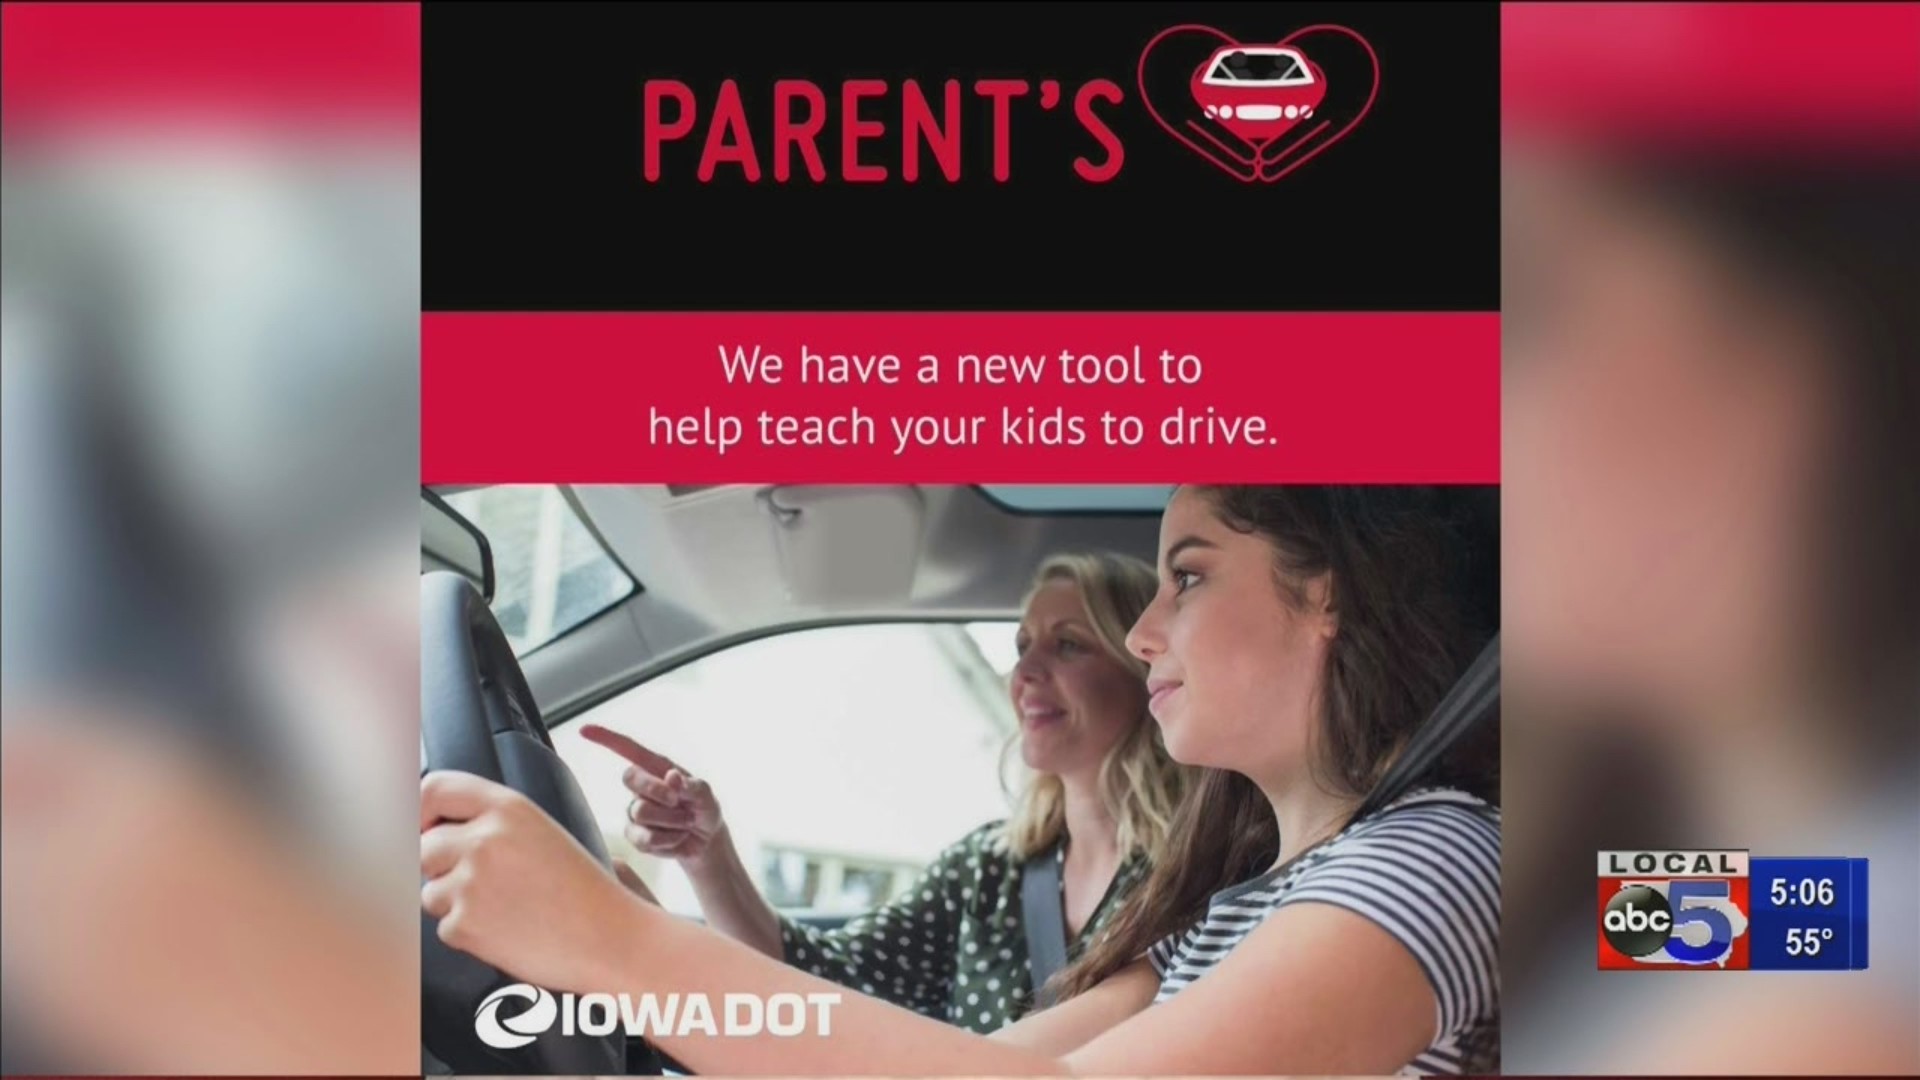 The Iowa DOT's new app called Road Ready helps parents teach teens how to drive.